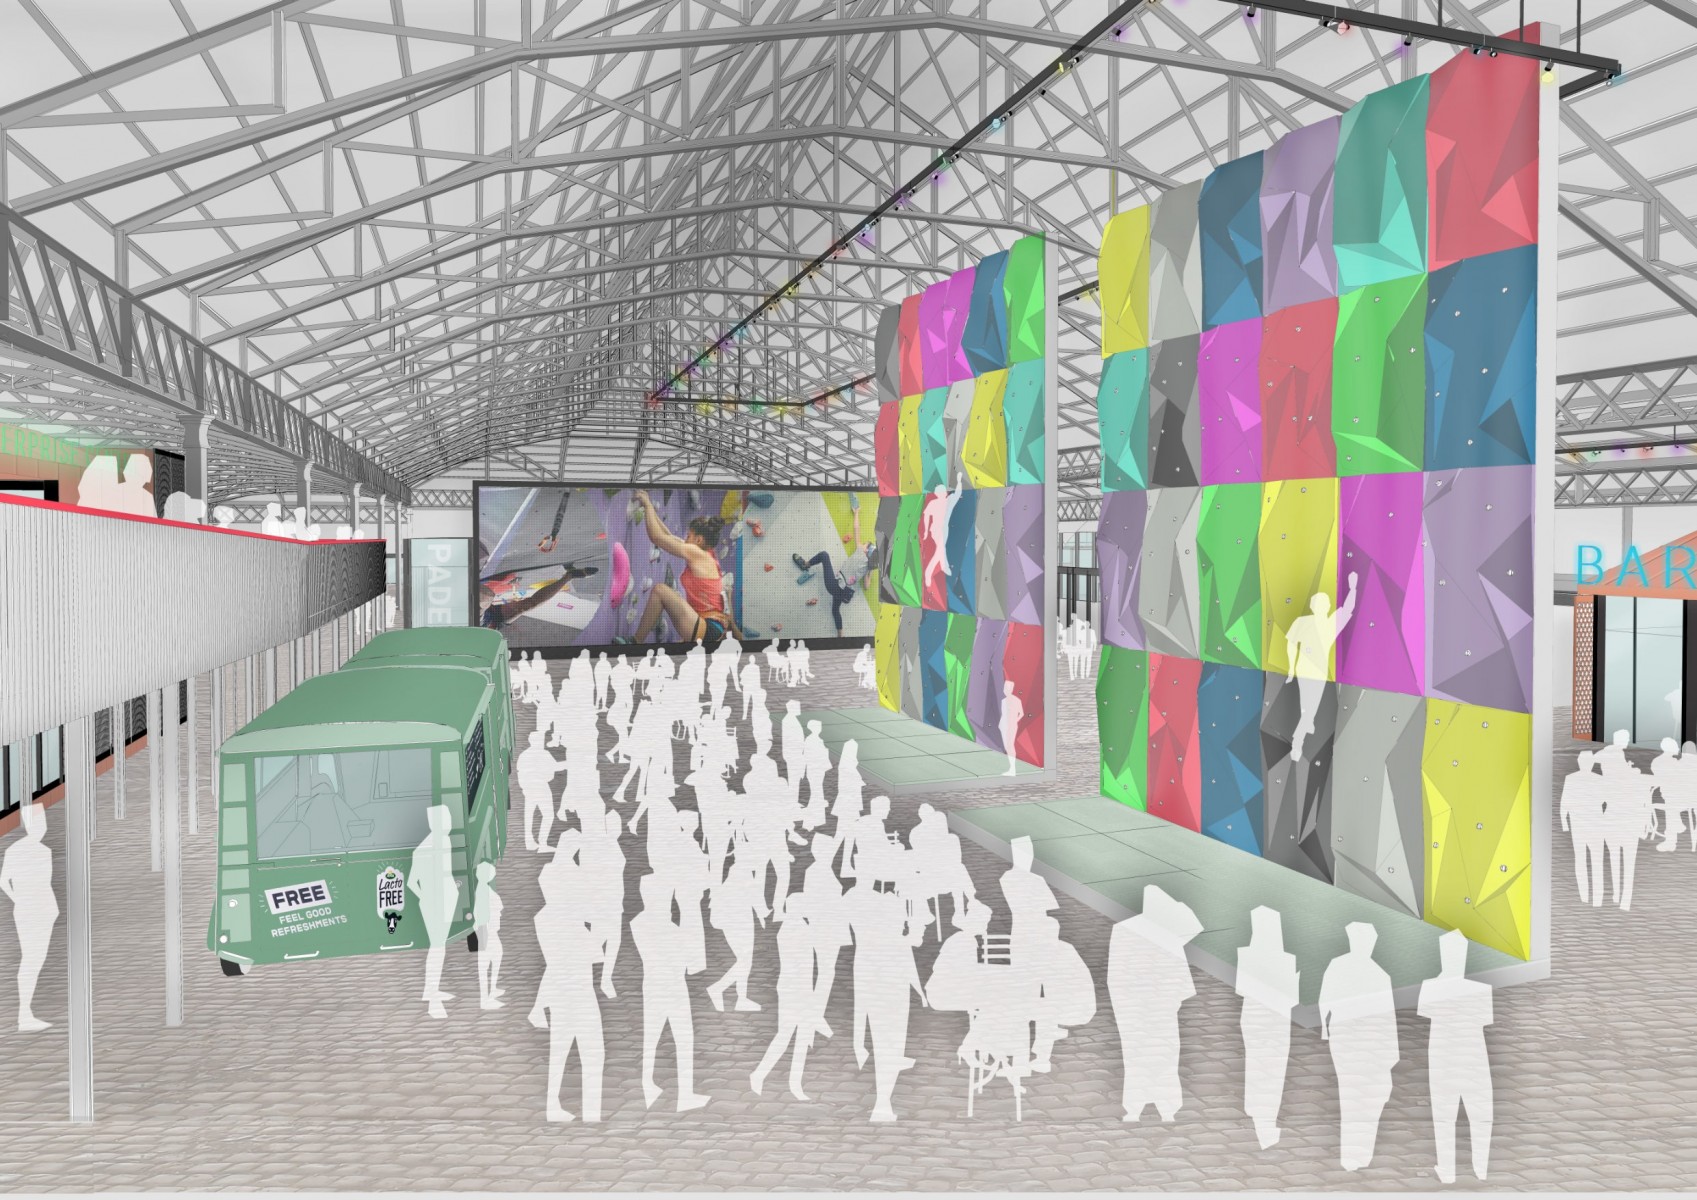 Details unveiled to regenerate Glasgow’s Meat Market sheds